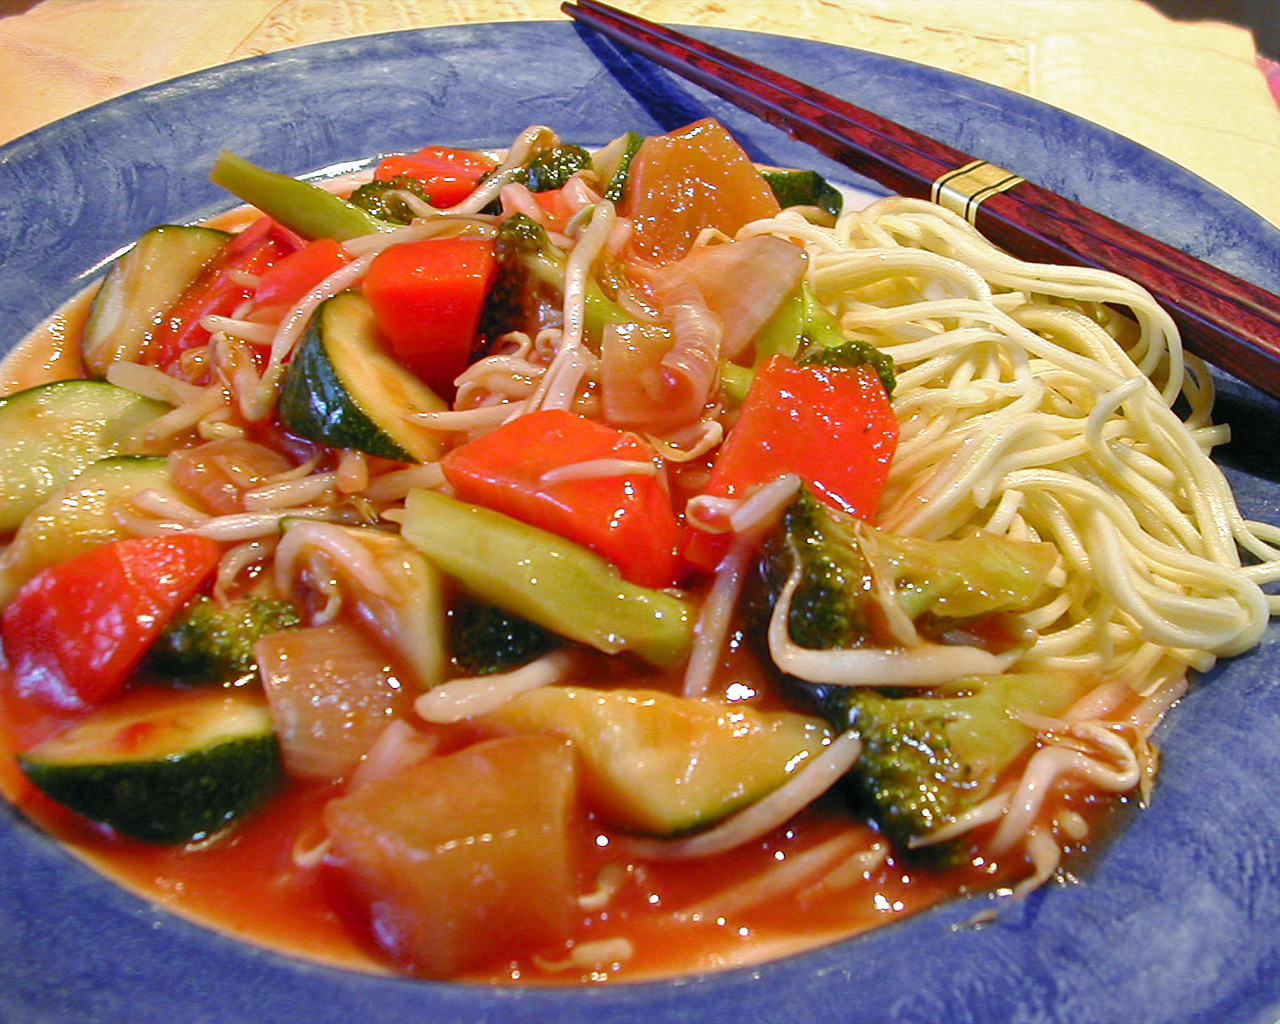 Sweet and Sour Noodle Stir-Fry